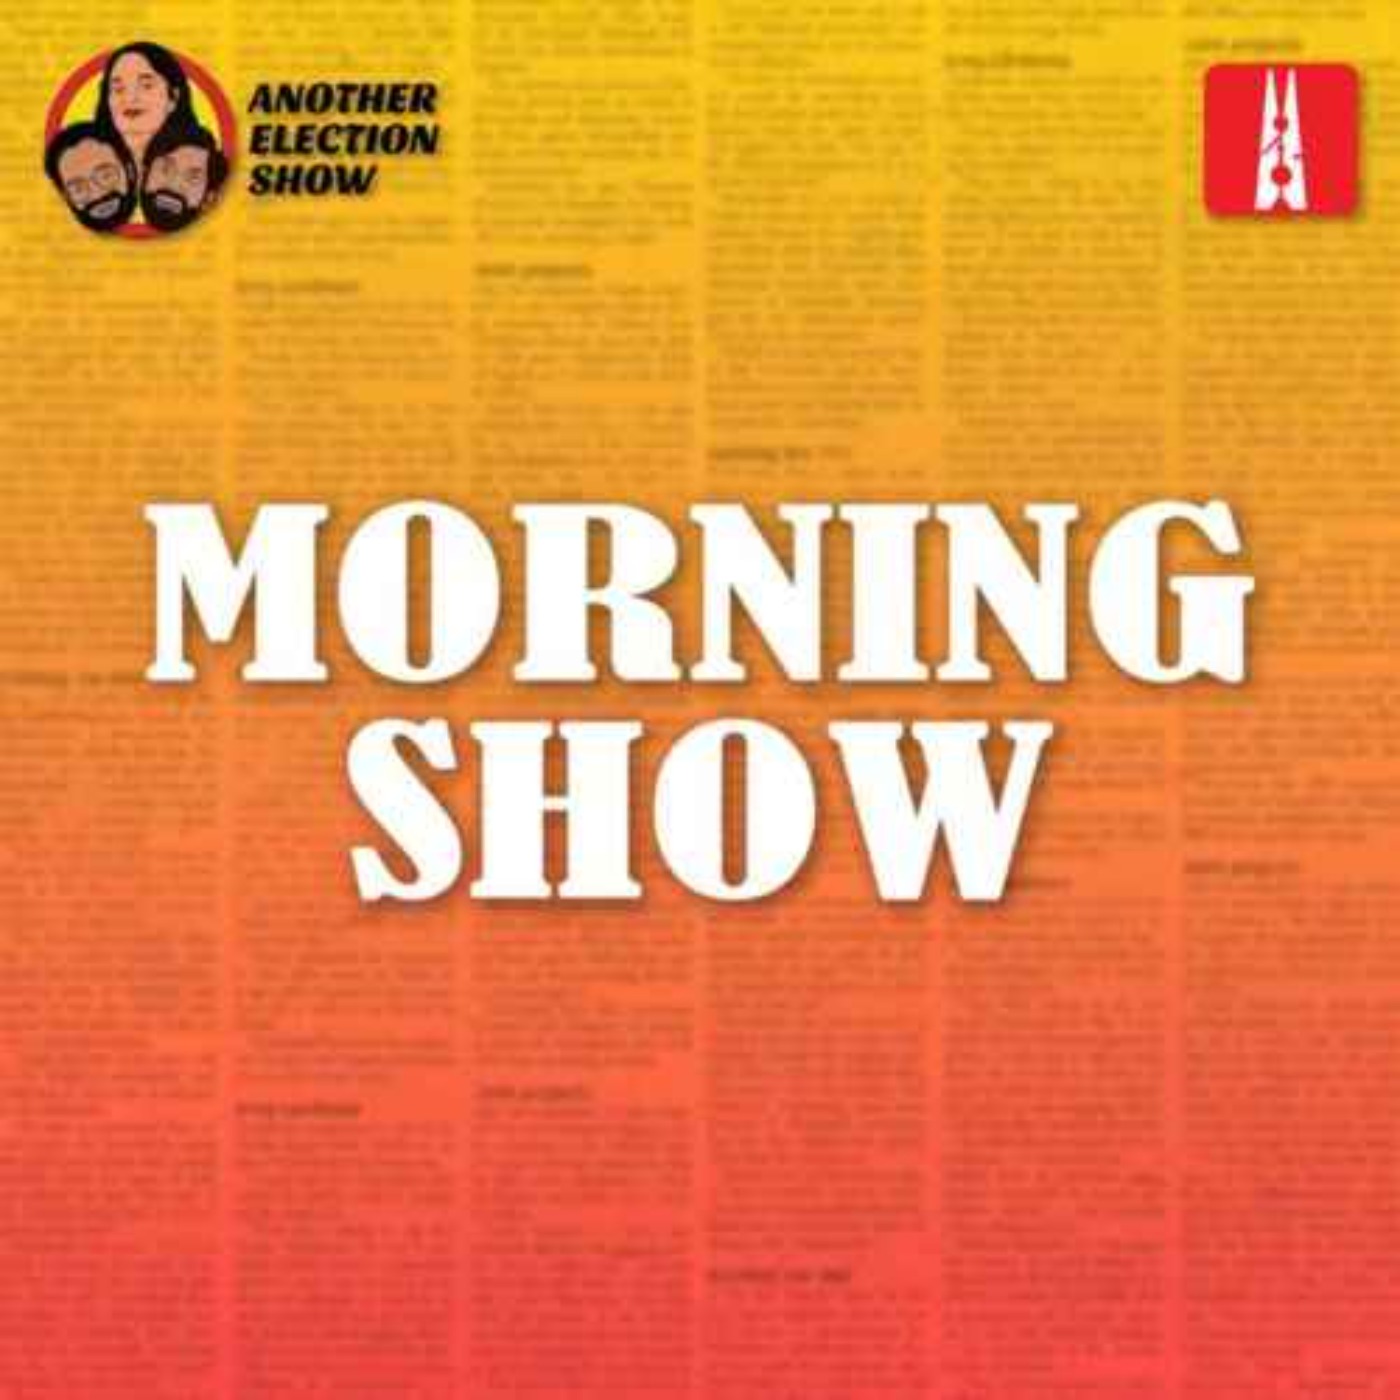 cover art for Morning Show is back! Atul & Manisha discuss elections in Himachal Pradesh Another Election Show 01